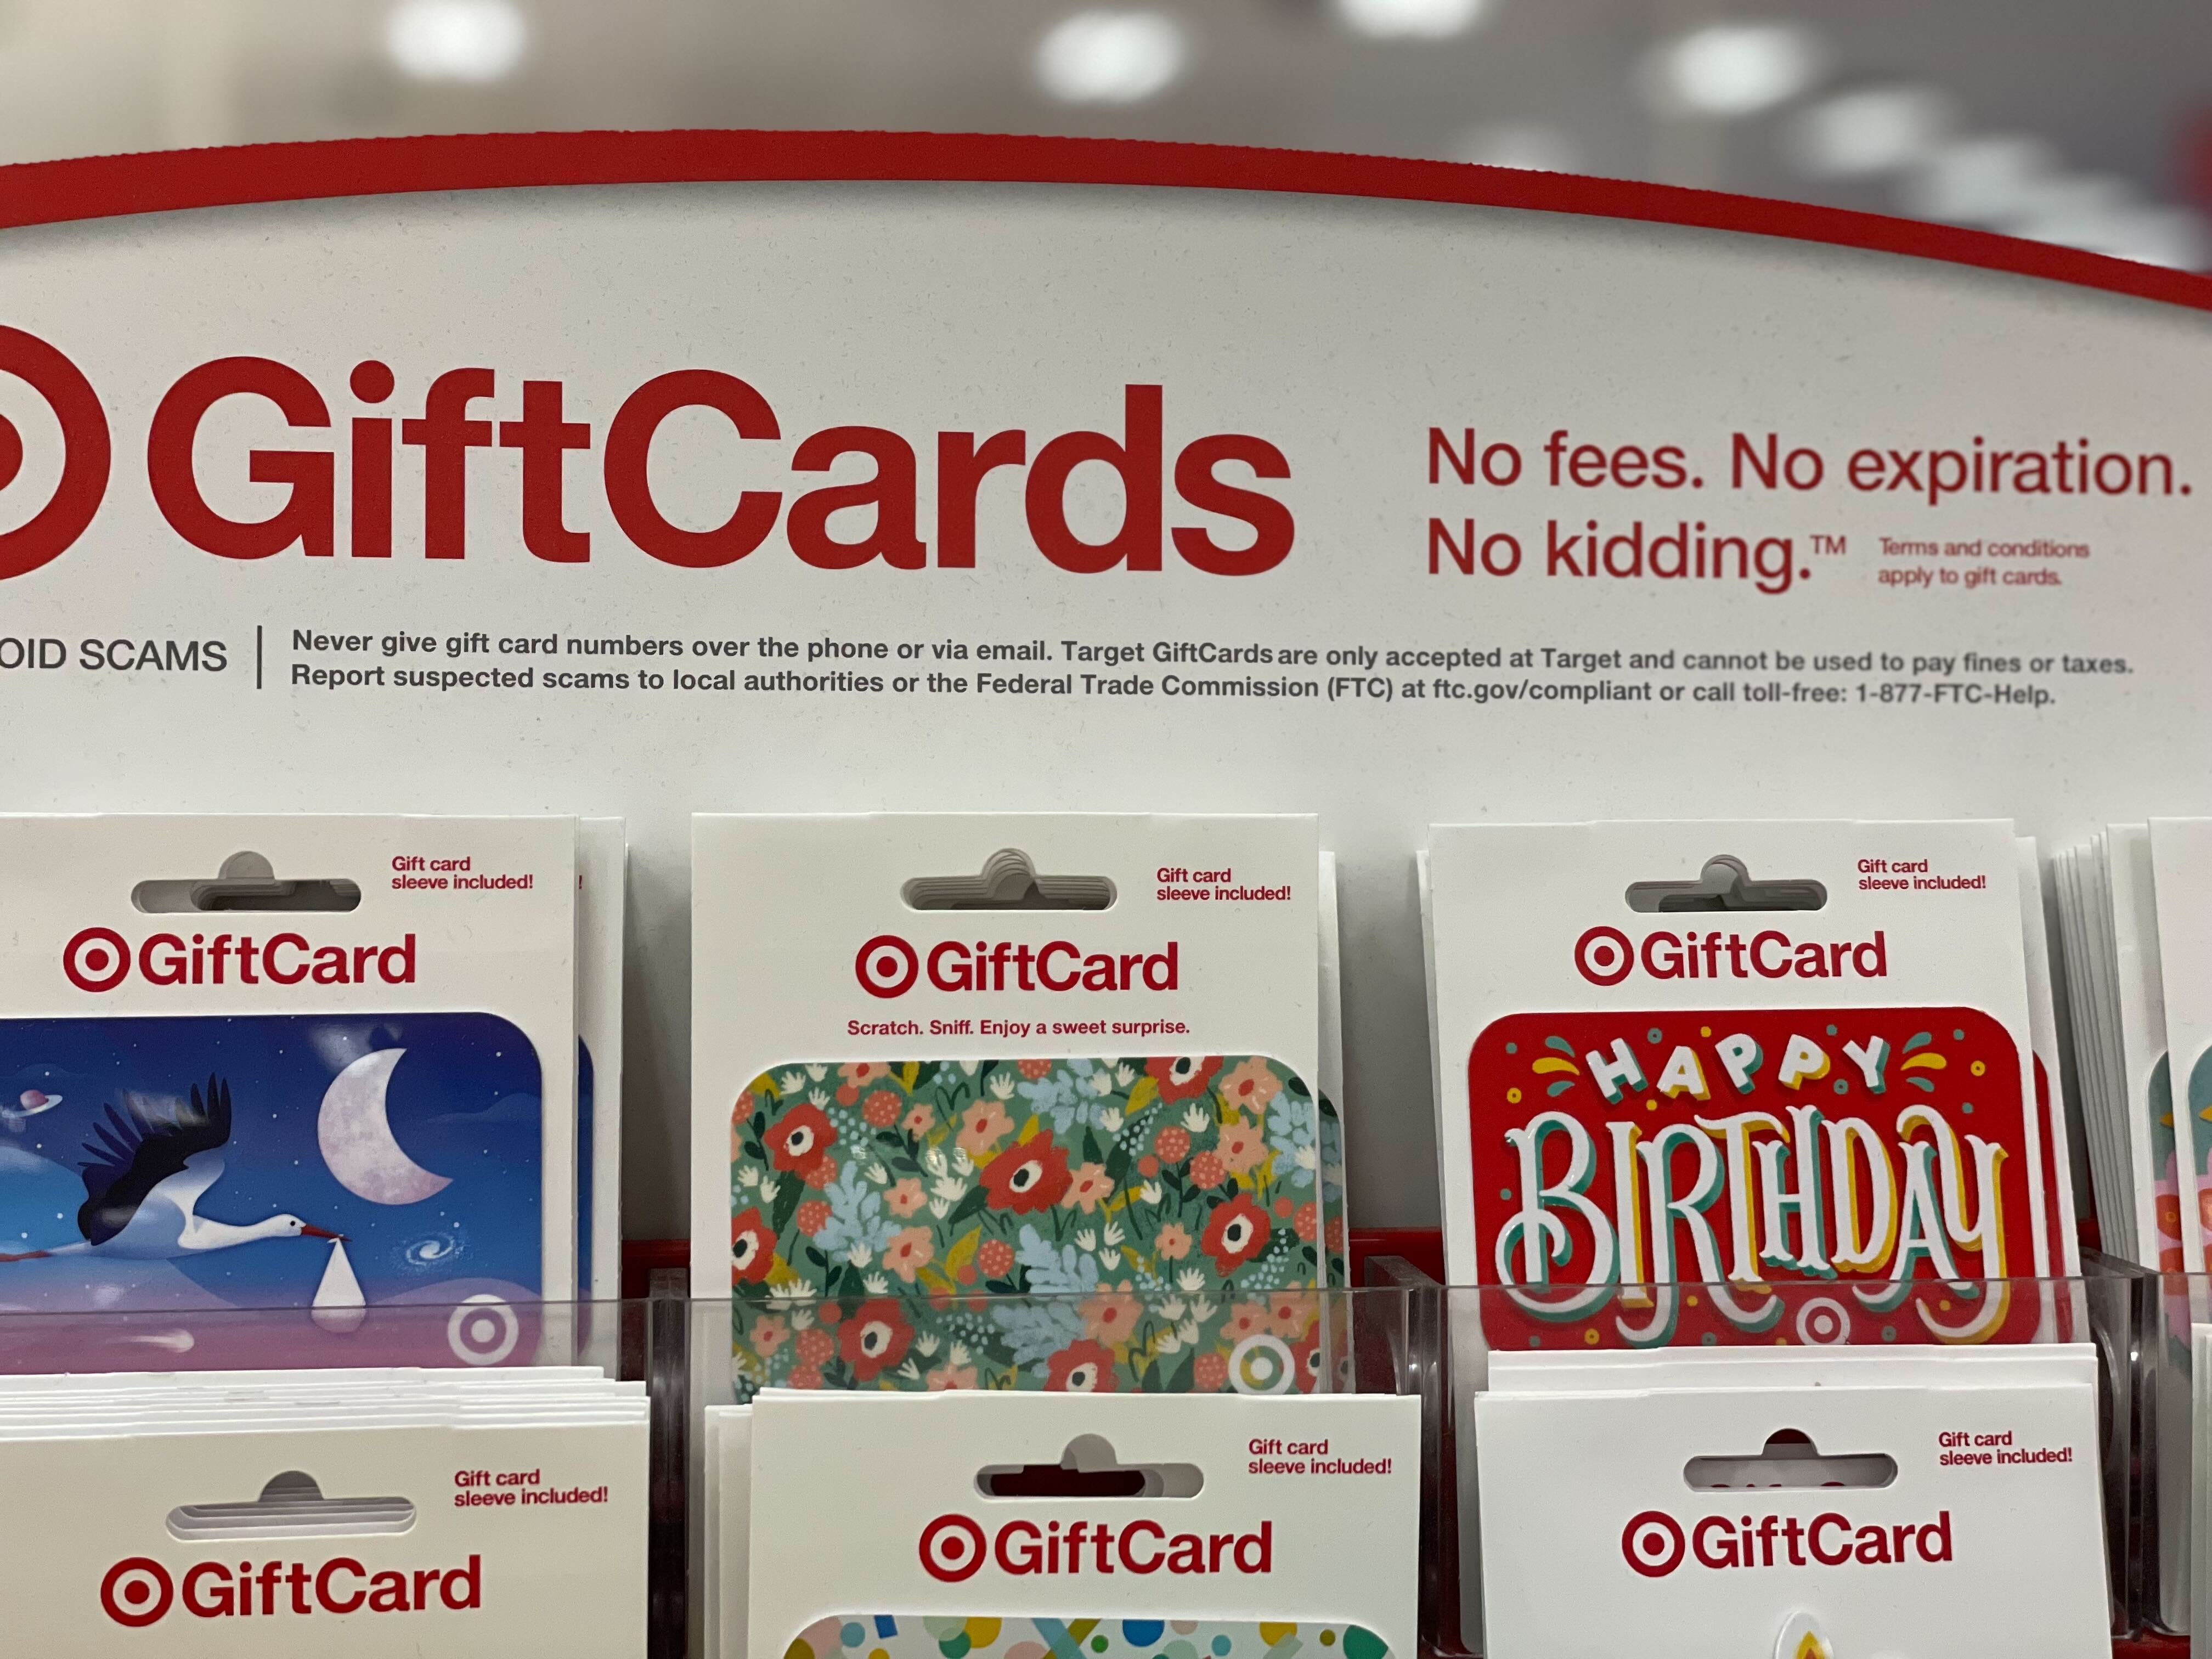   Gift Card for any amount in a Secure Sleeve